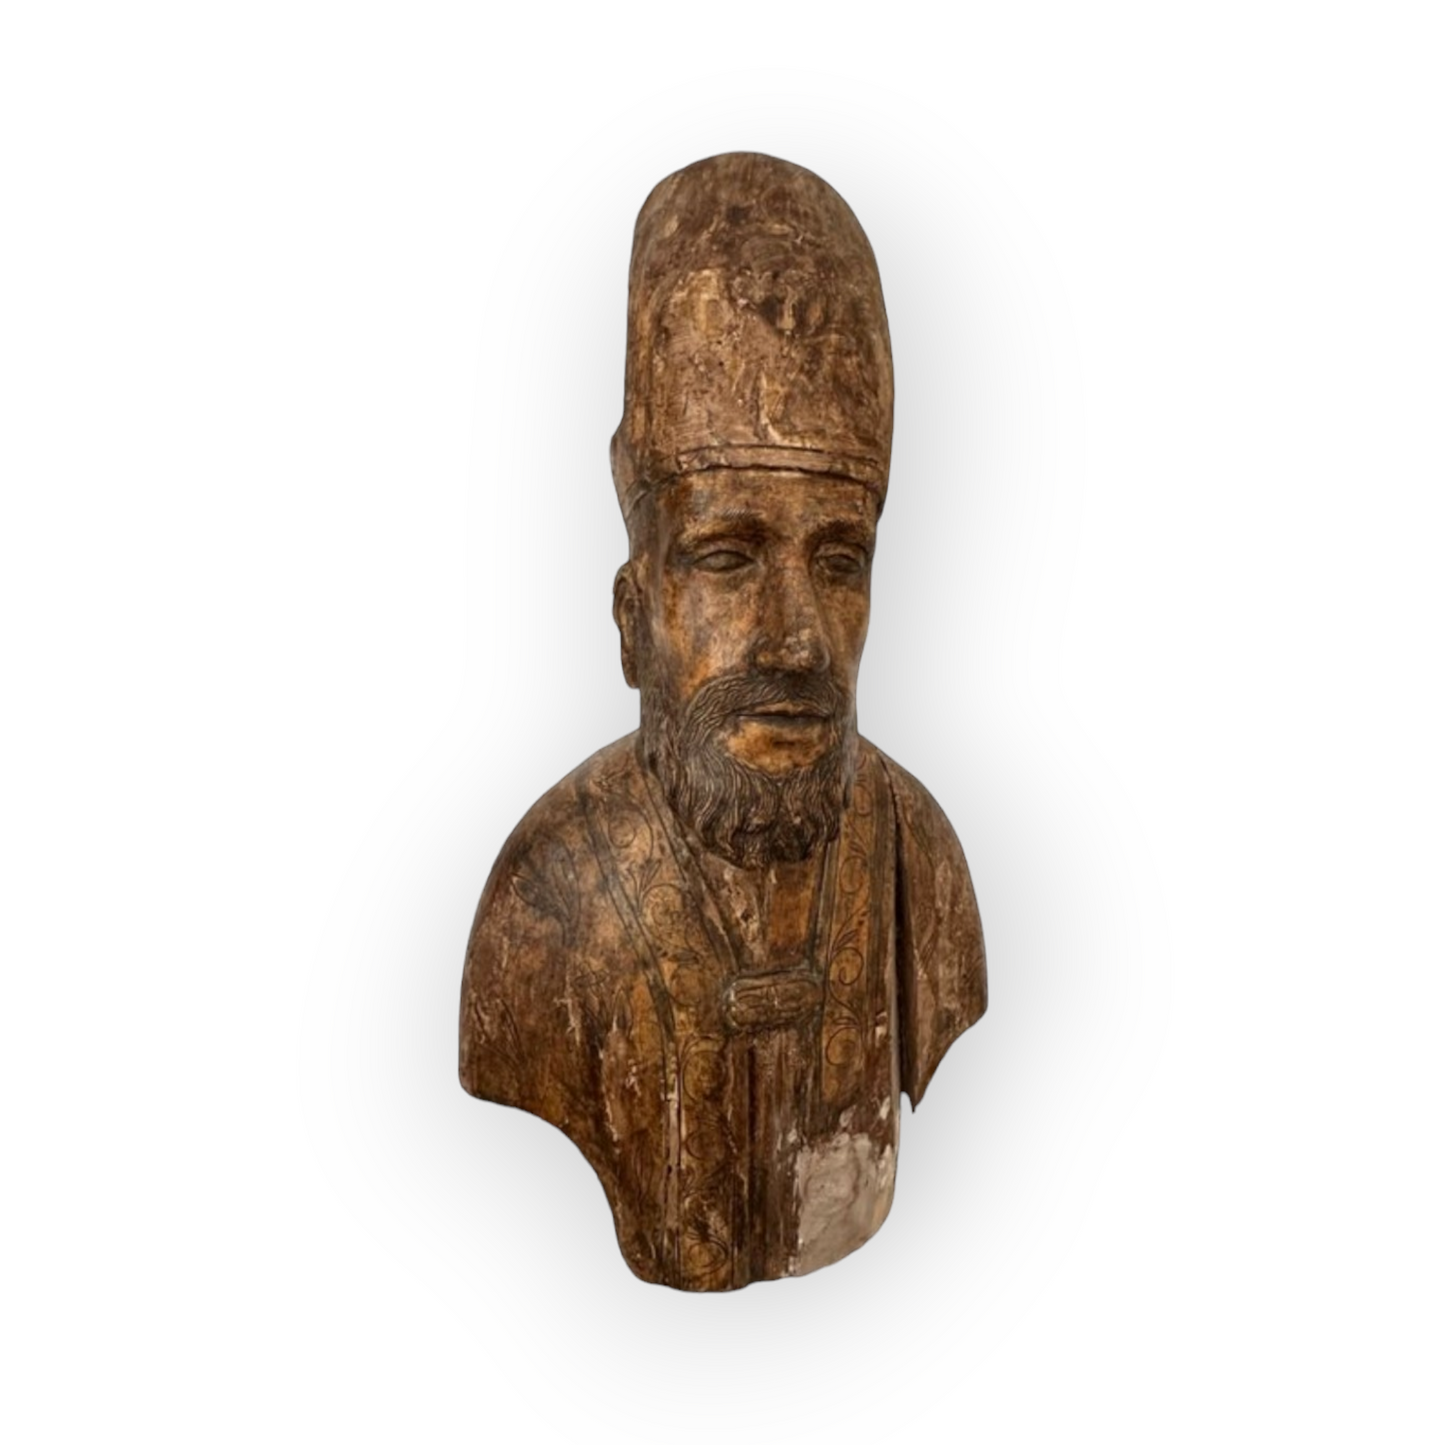 Life-size Early 17thC Italian Antique Carved Wooden Bust / Sculpture of a Bishop Saint